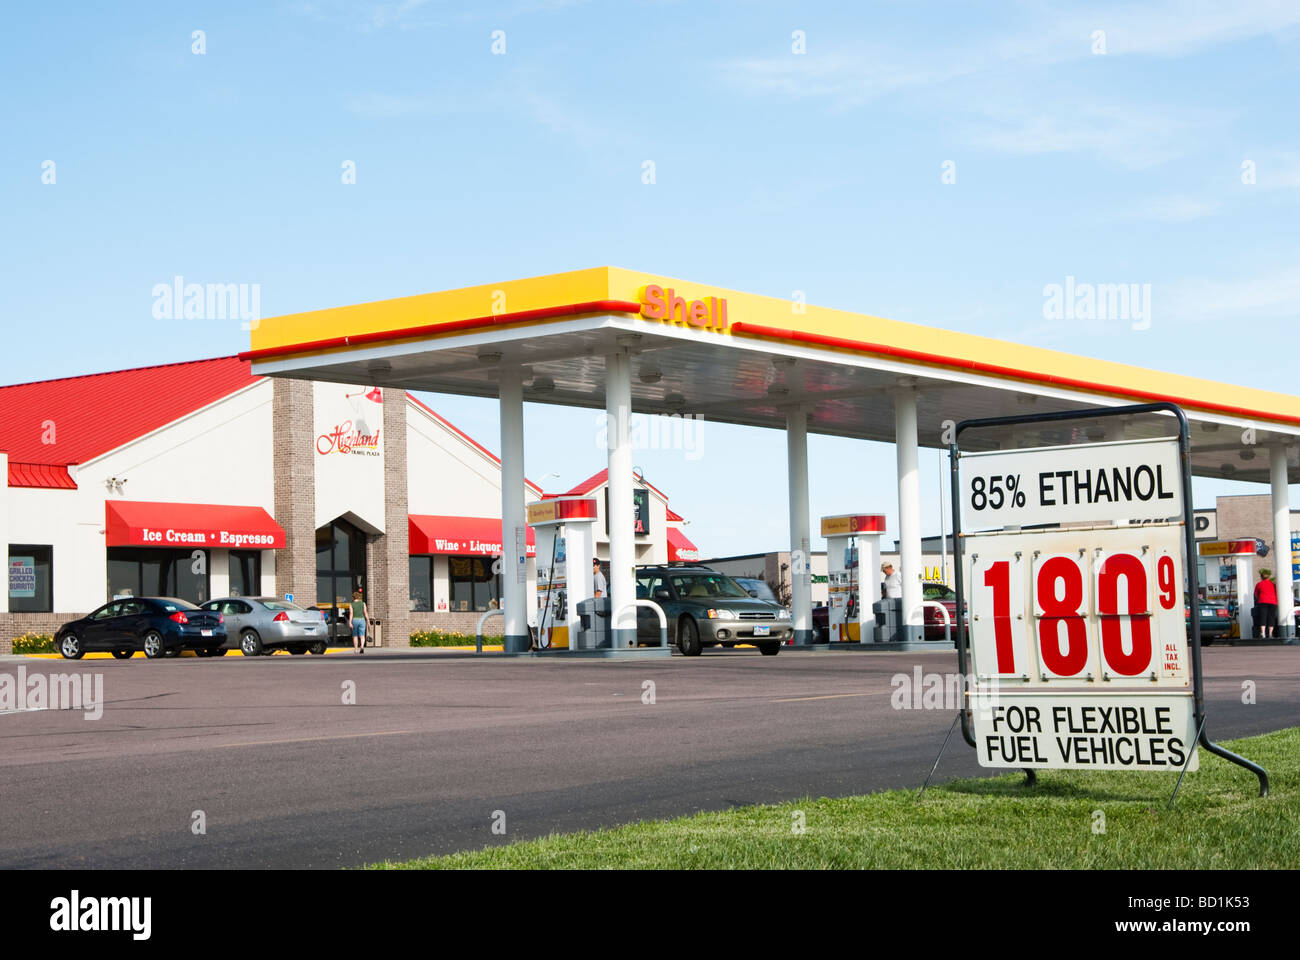 E 85 ethanol flexfuel price sign at a gas filling station Stock Photo